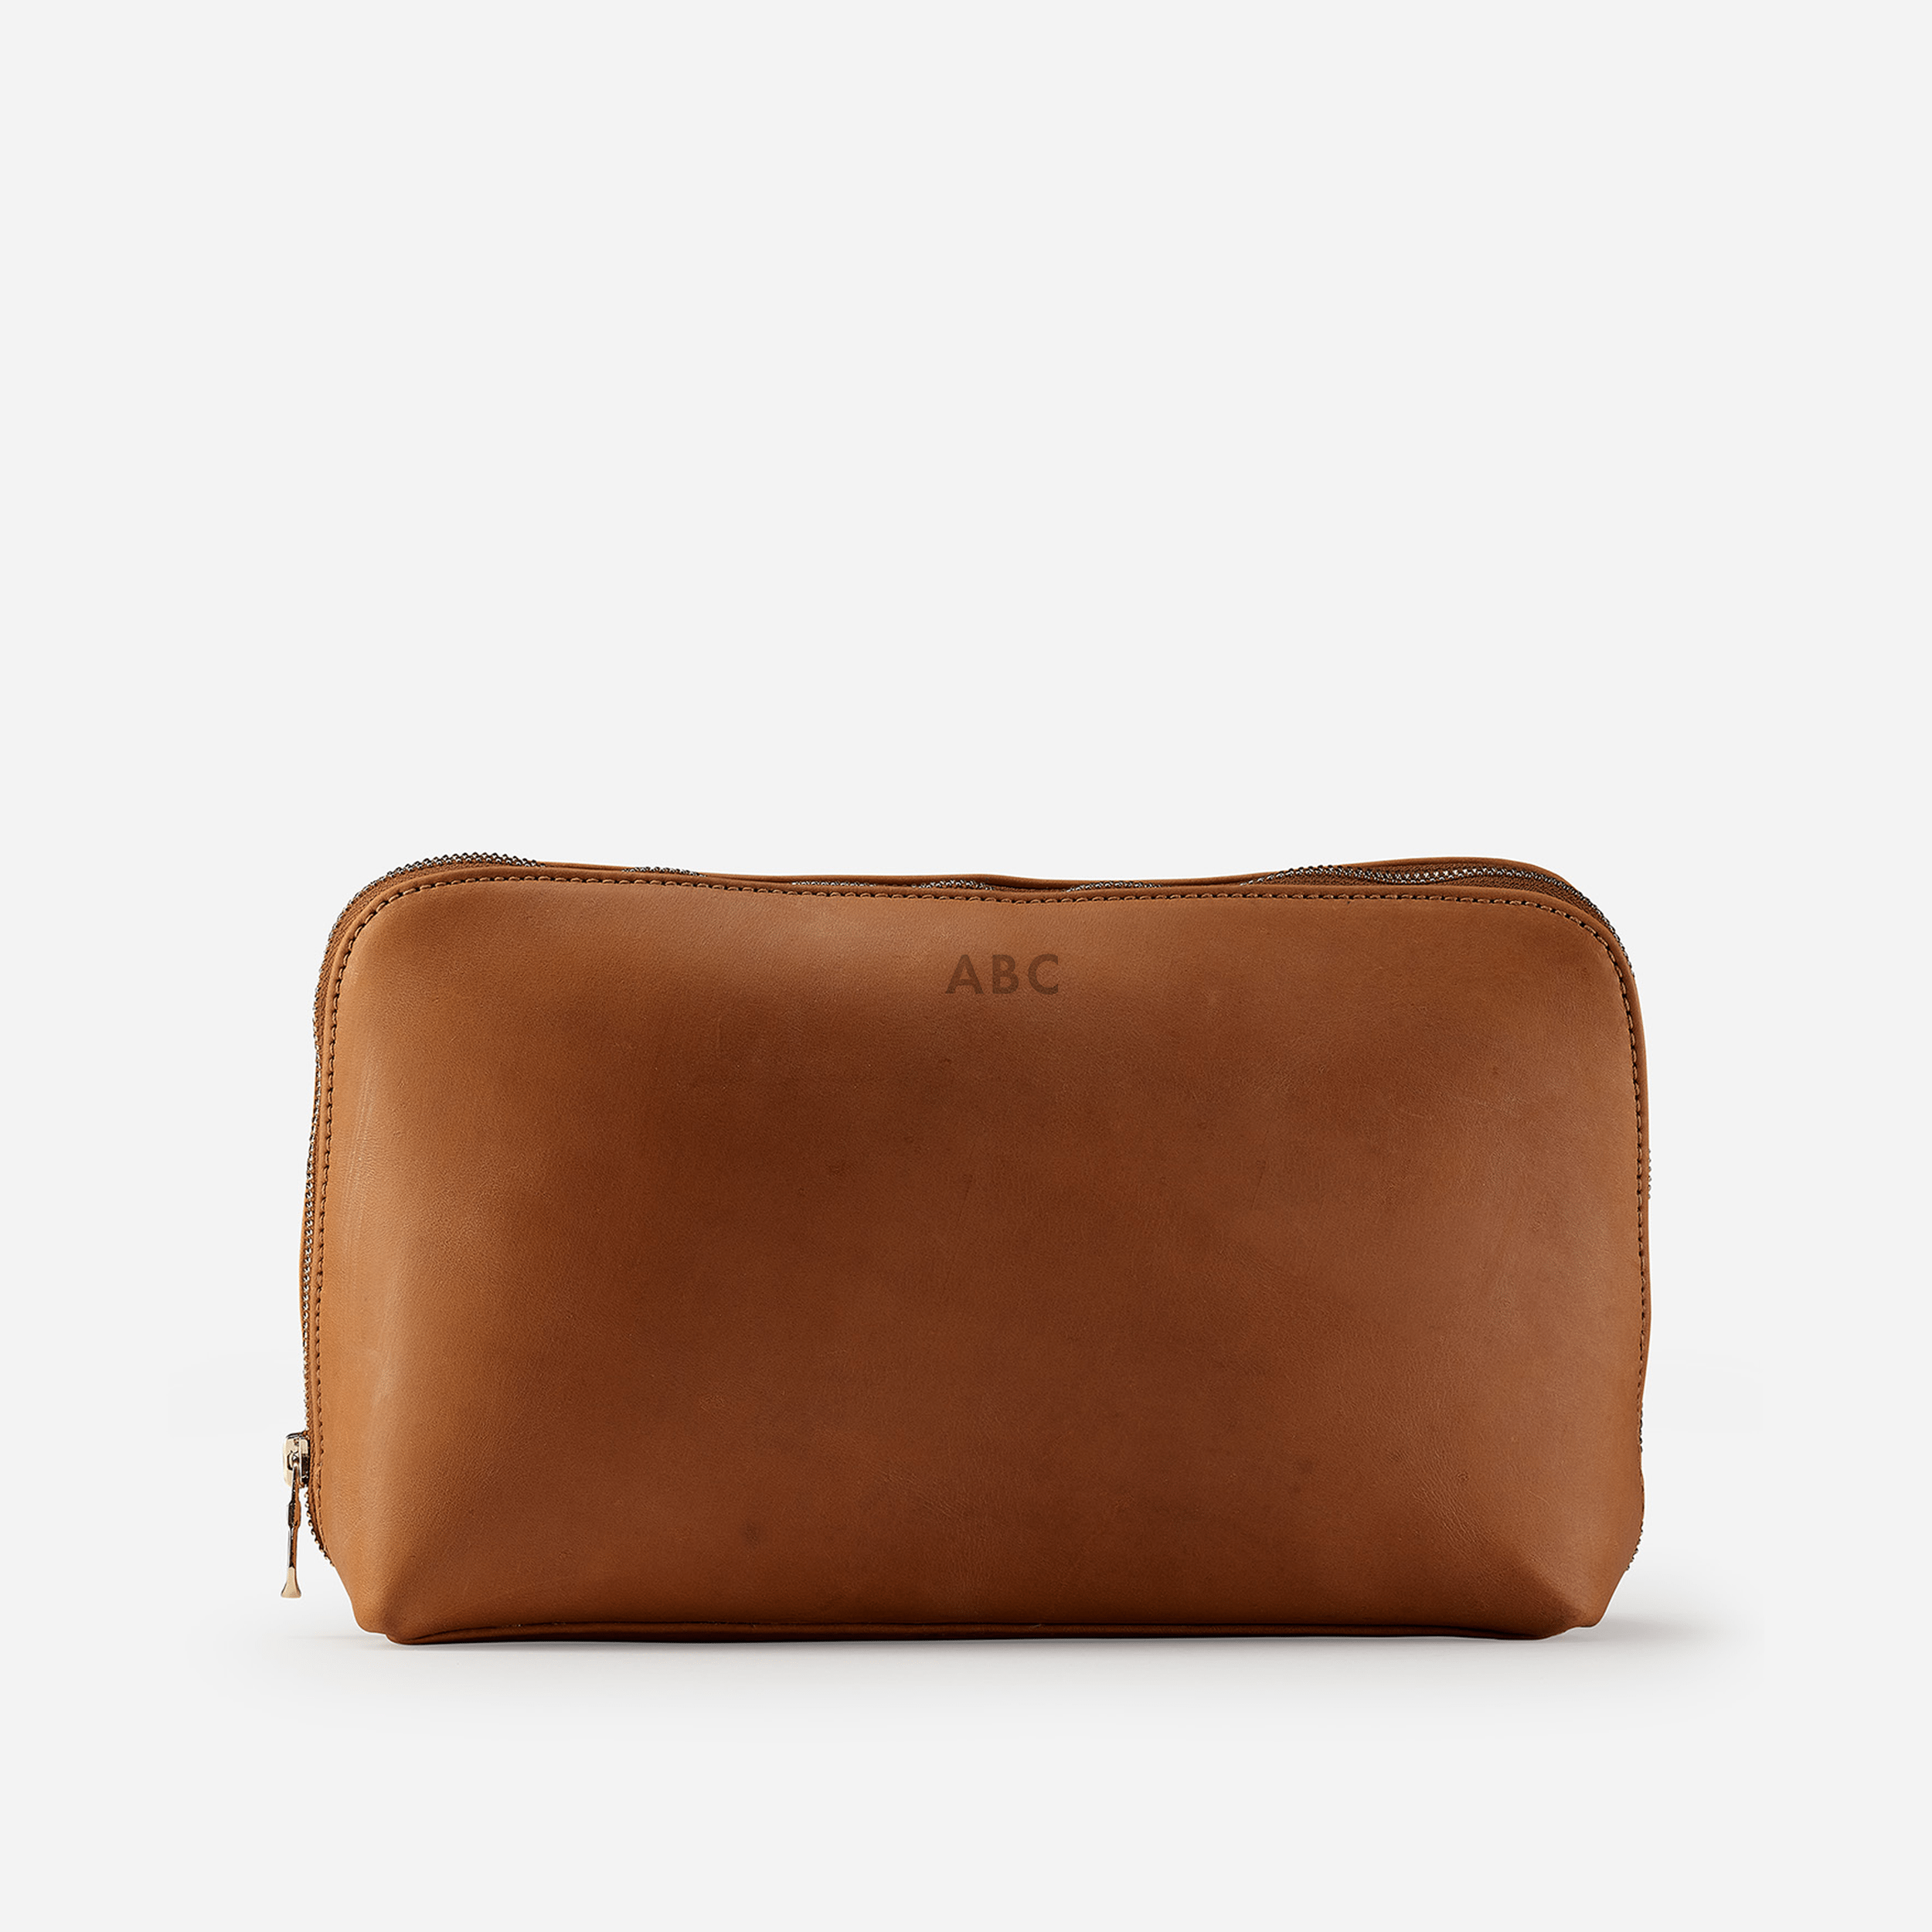 Mulu Catchall Pouch - Parker Clay 